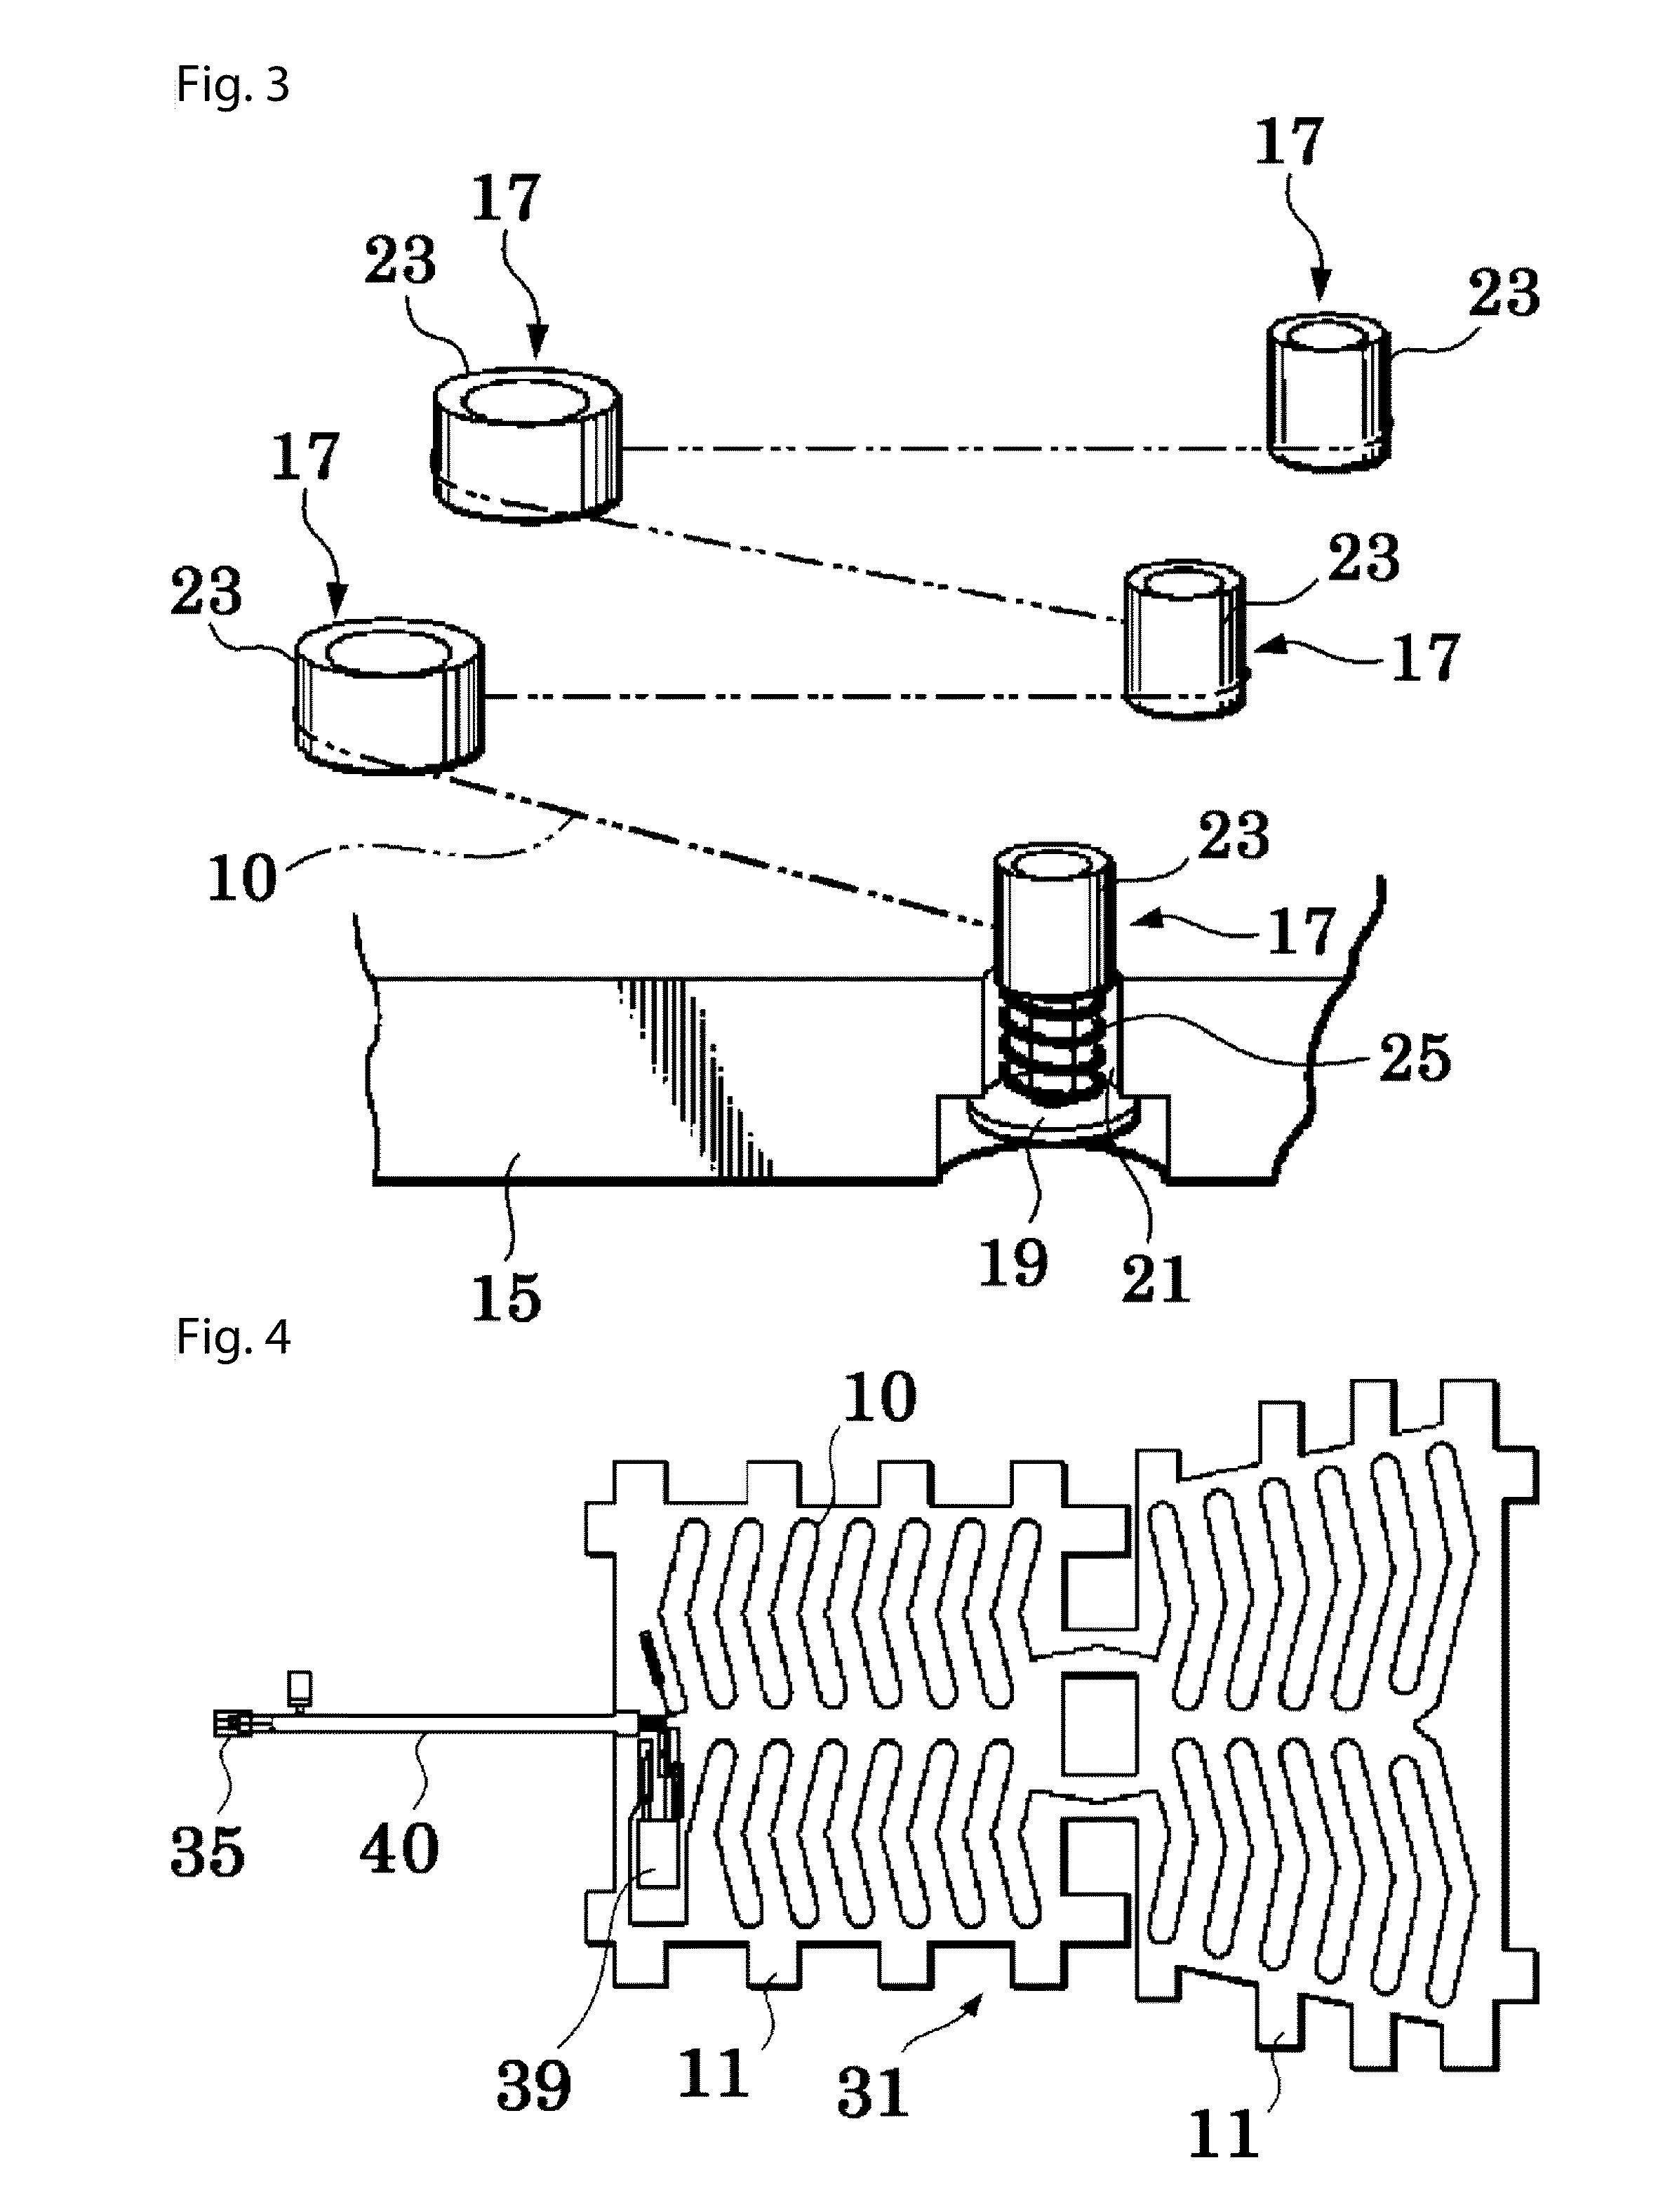 Cord-shaped heater and sheet-shaped heater